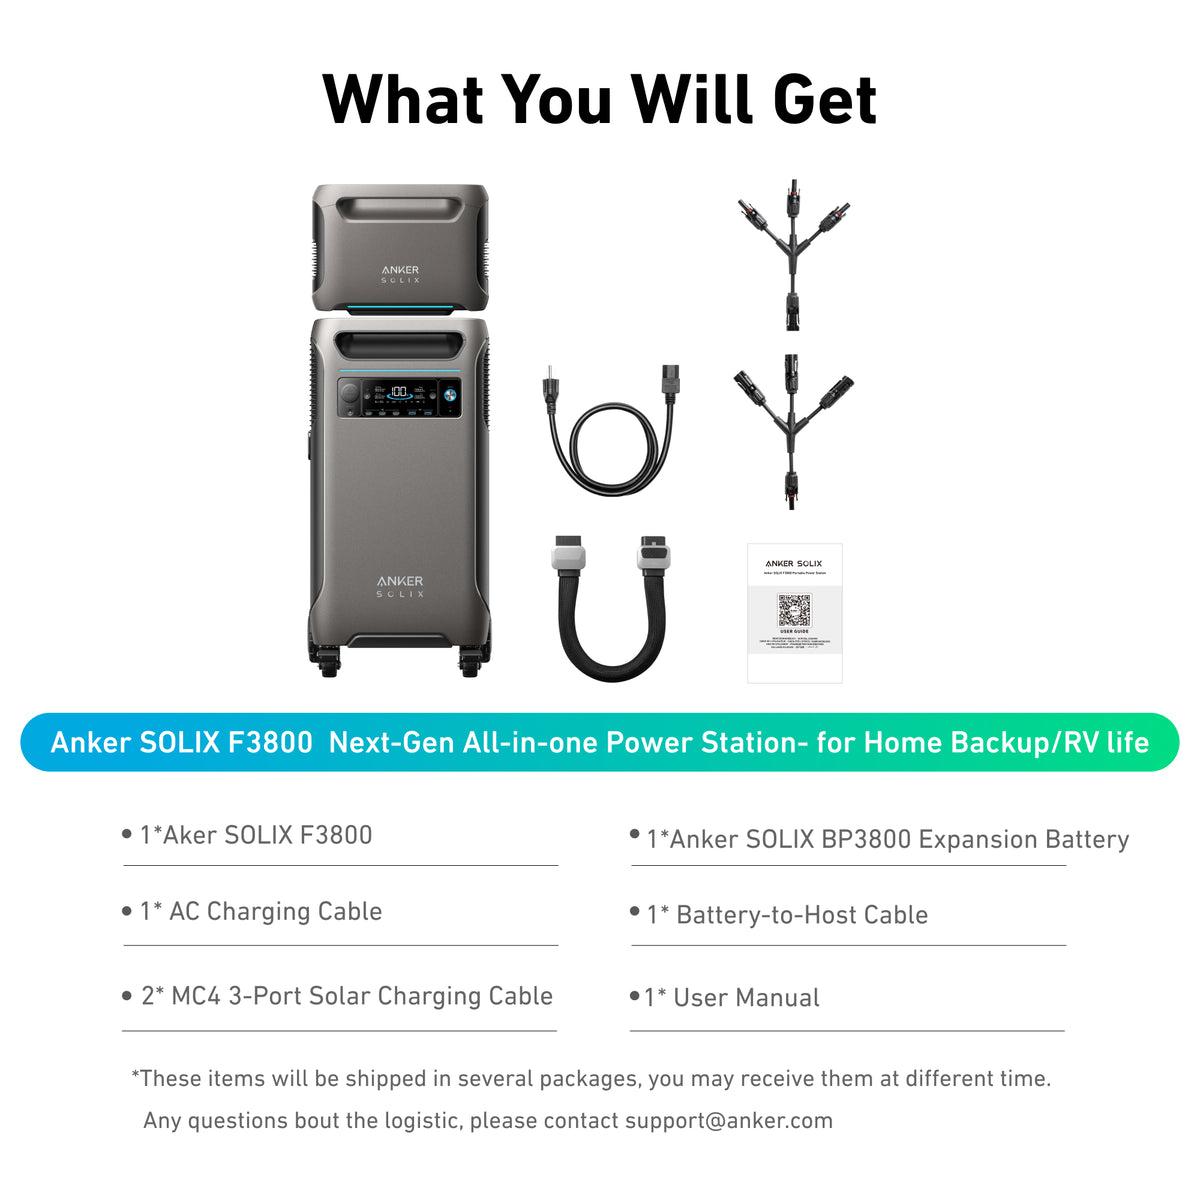 Anker SOLIX F3800 and BP3800 Expansion Battery